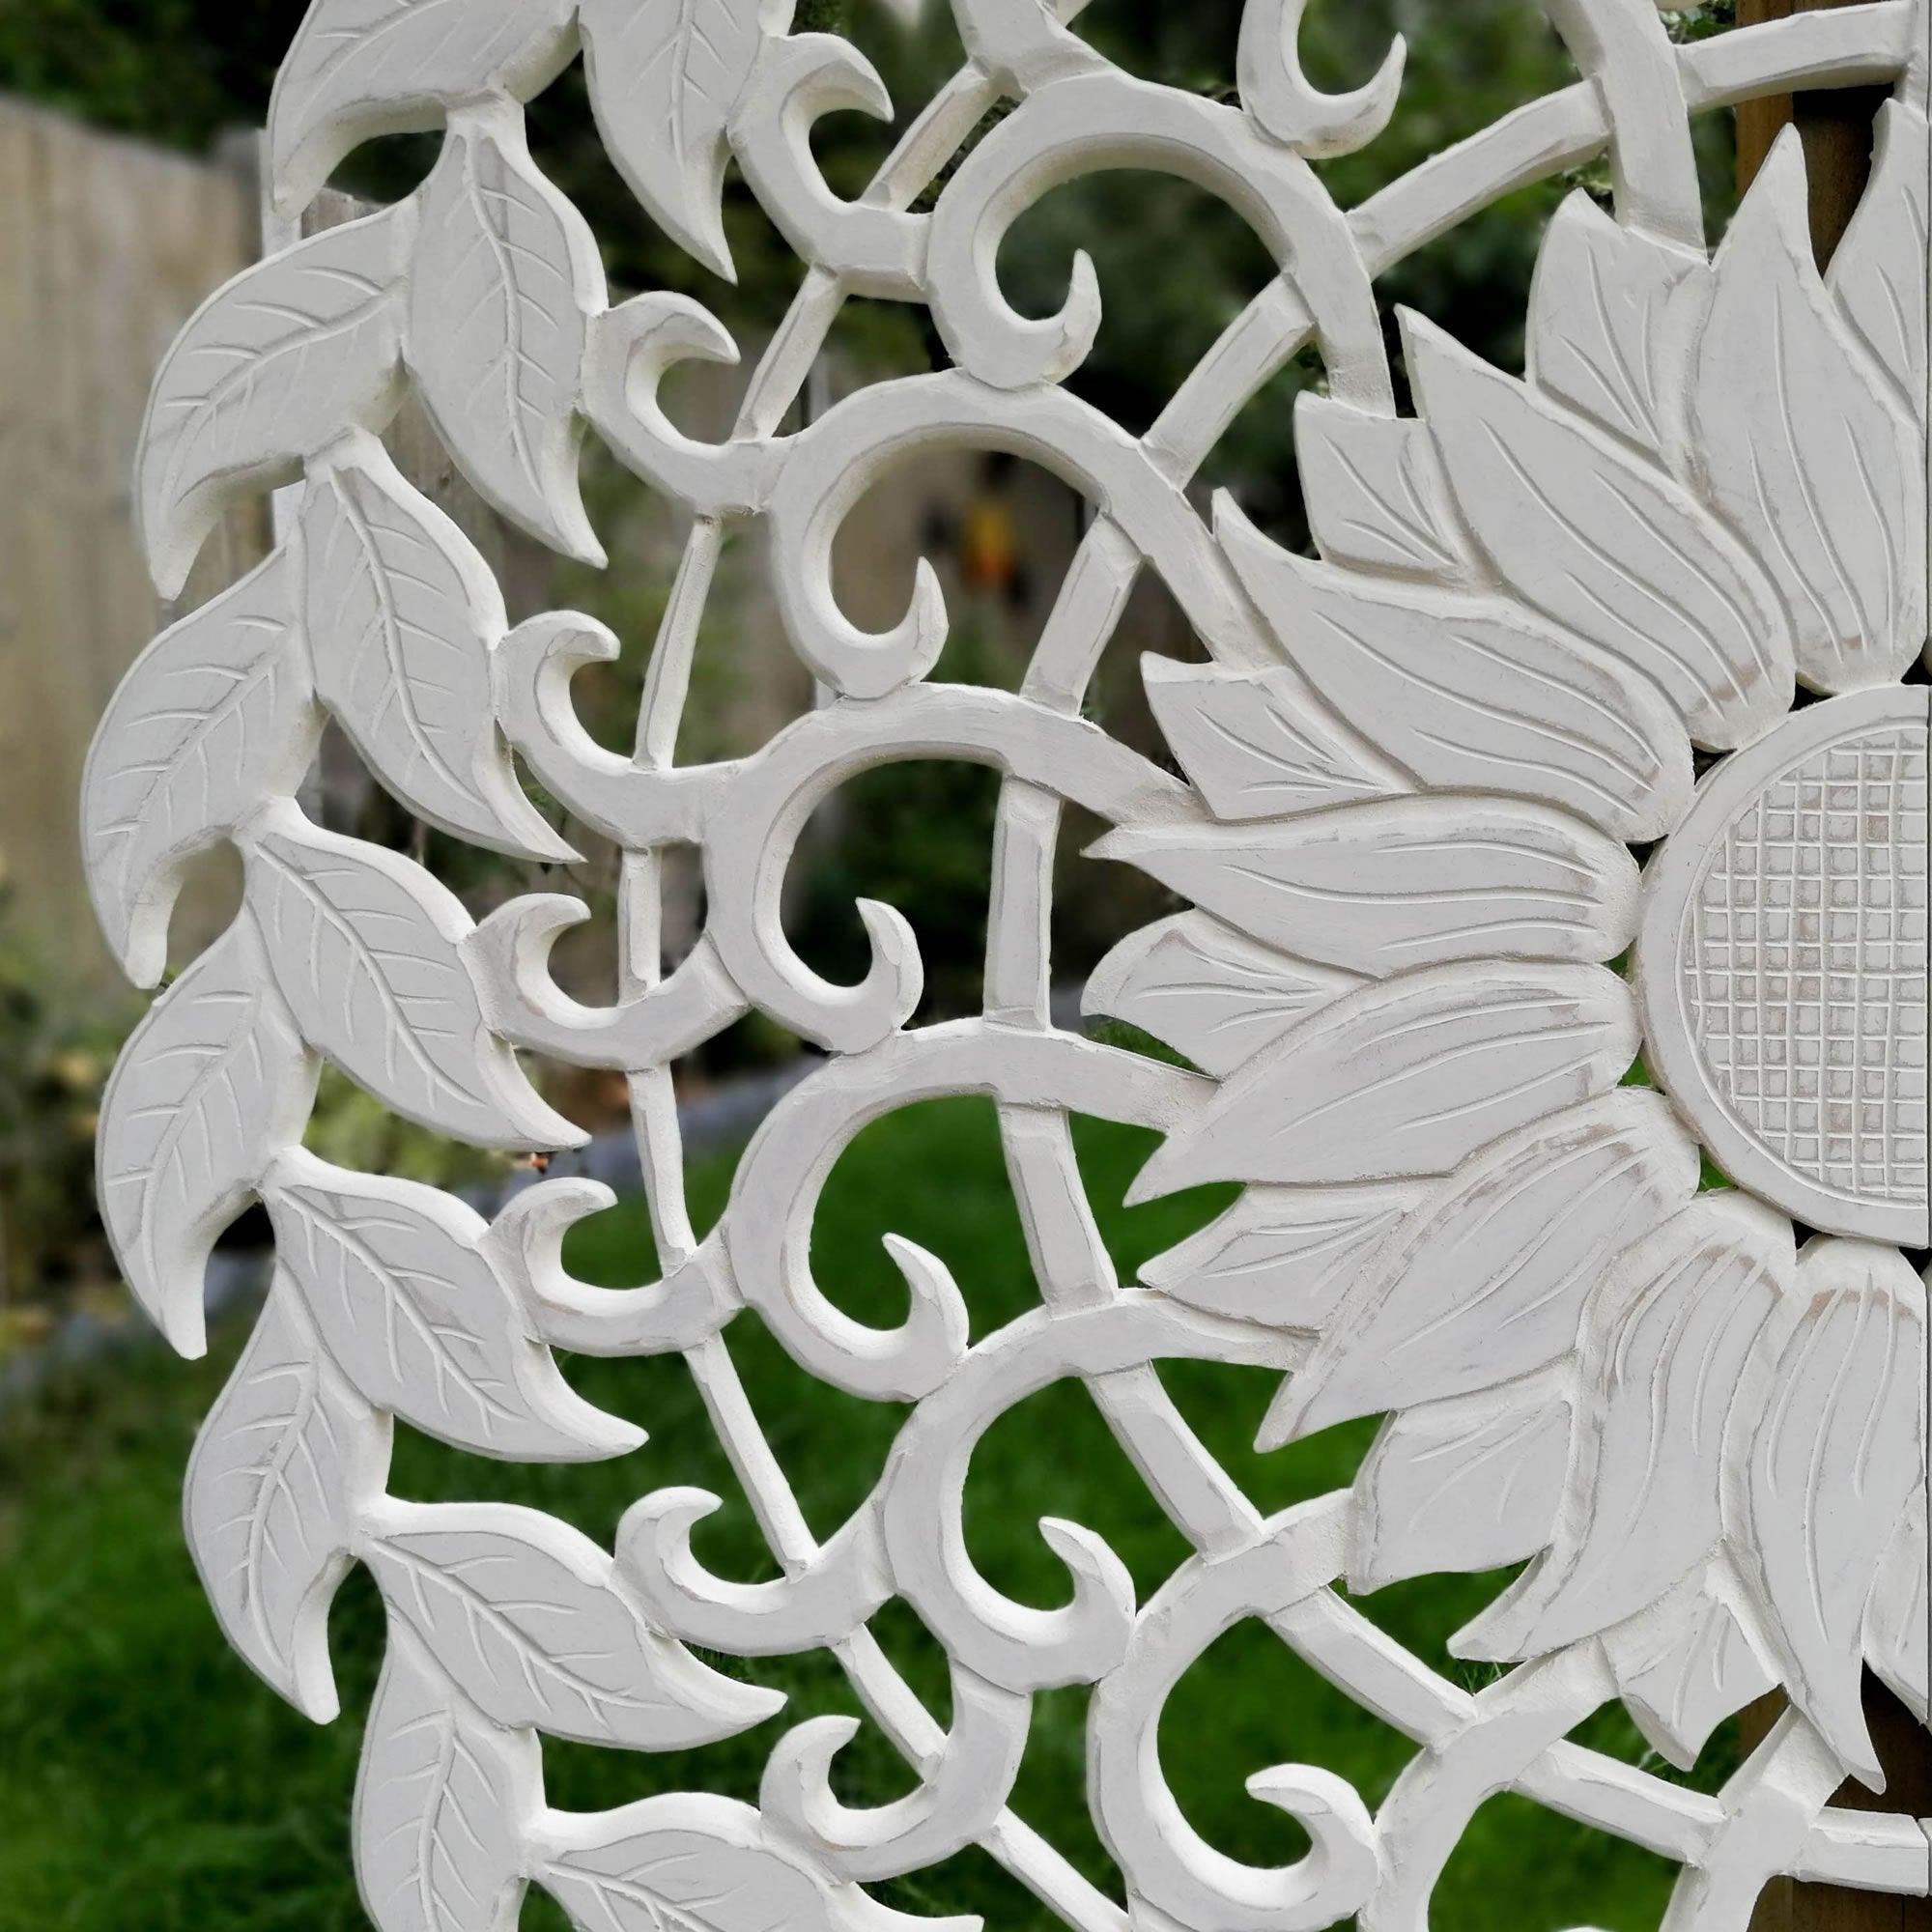 Carved Wooden Wall Art - Large Decorative Mandala Nature Eco Panel Headboard Sculpture 48" inches Round Distressed Shabby Chic White